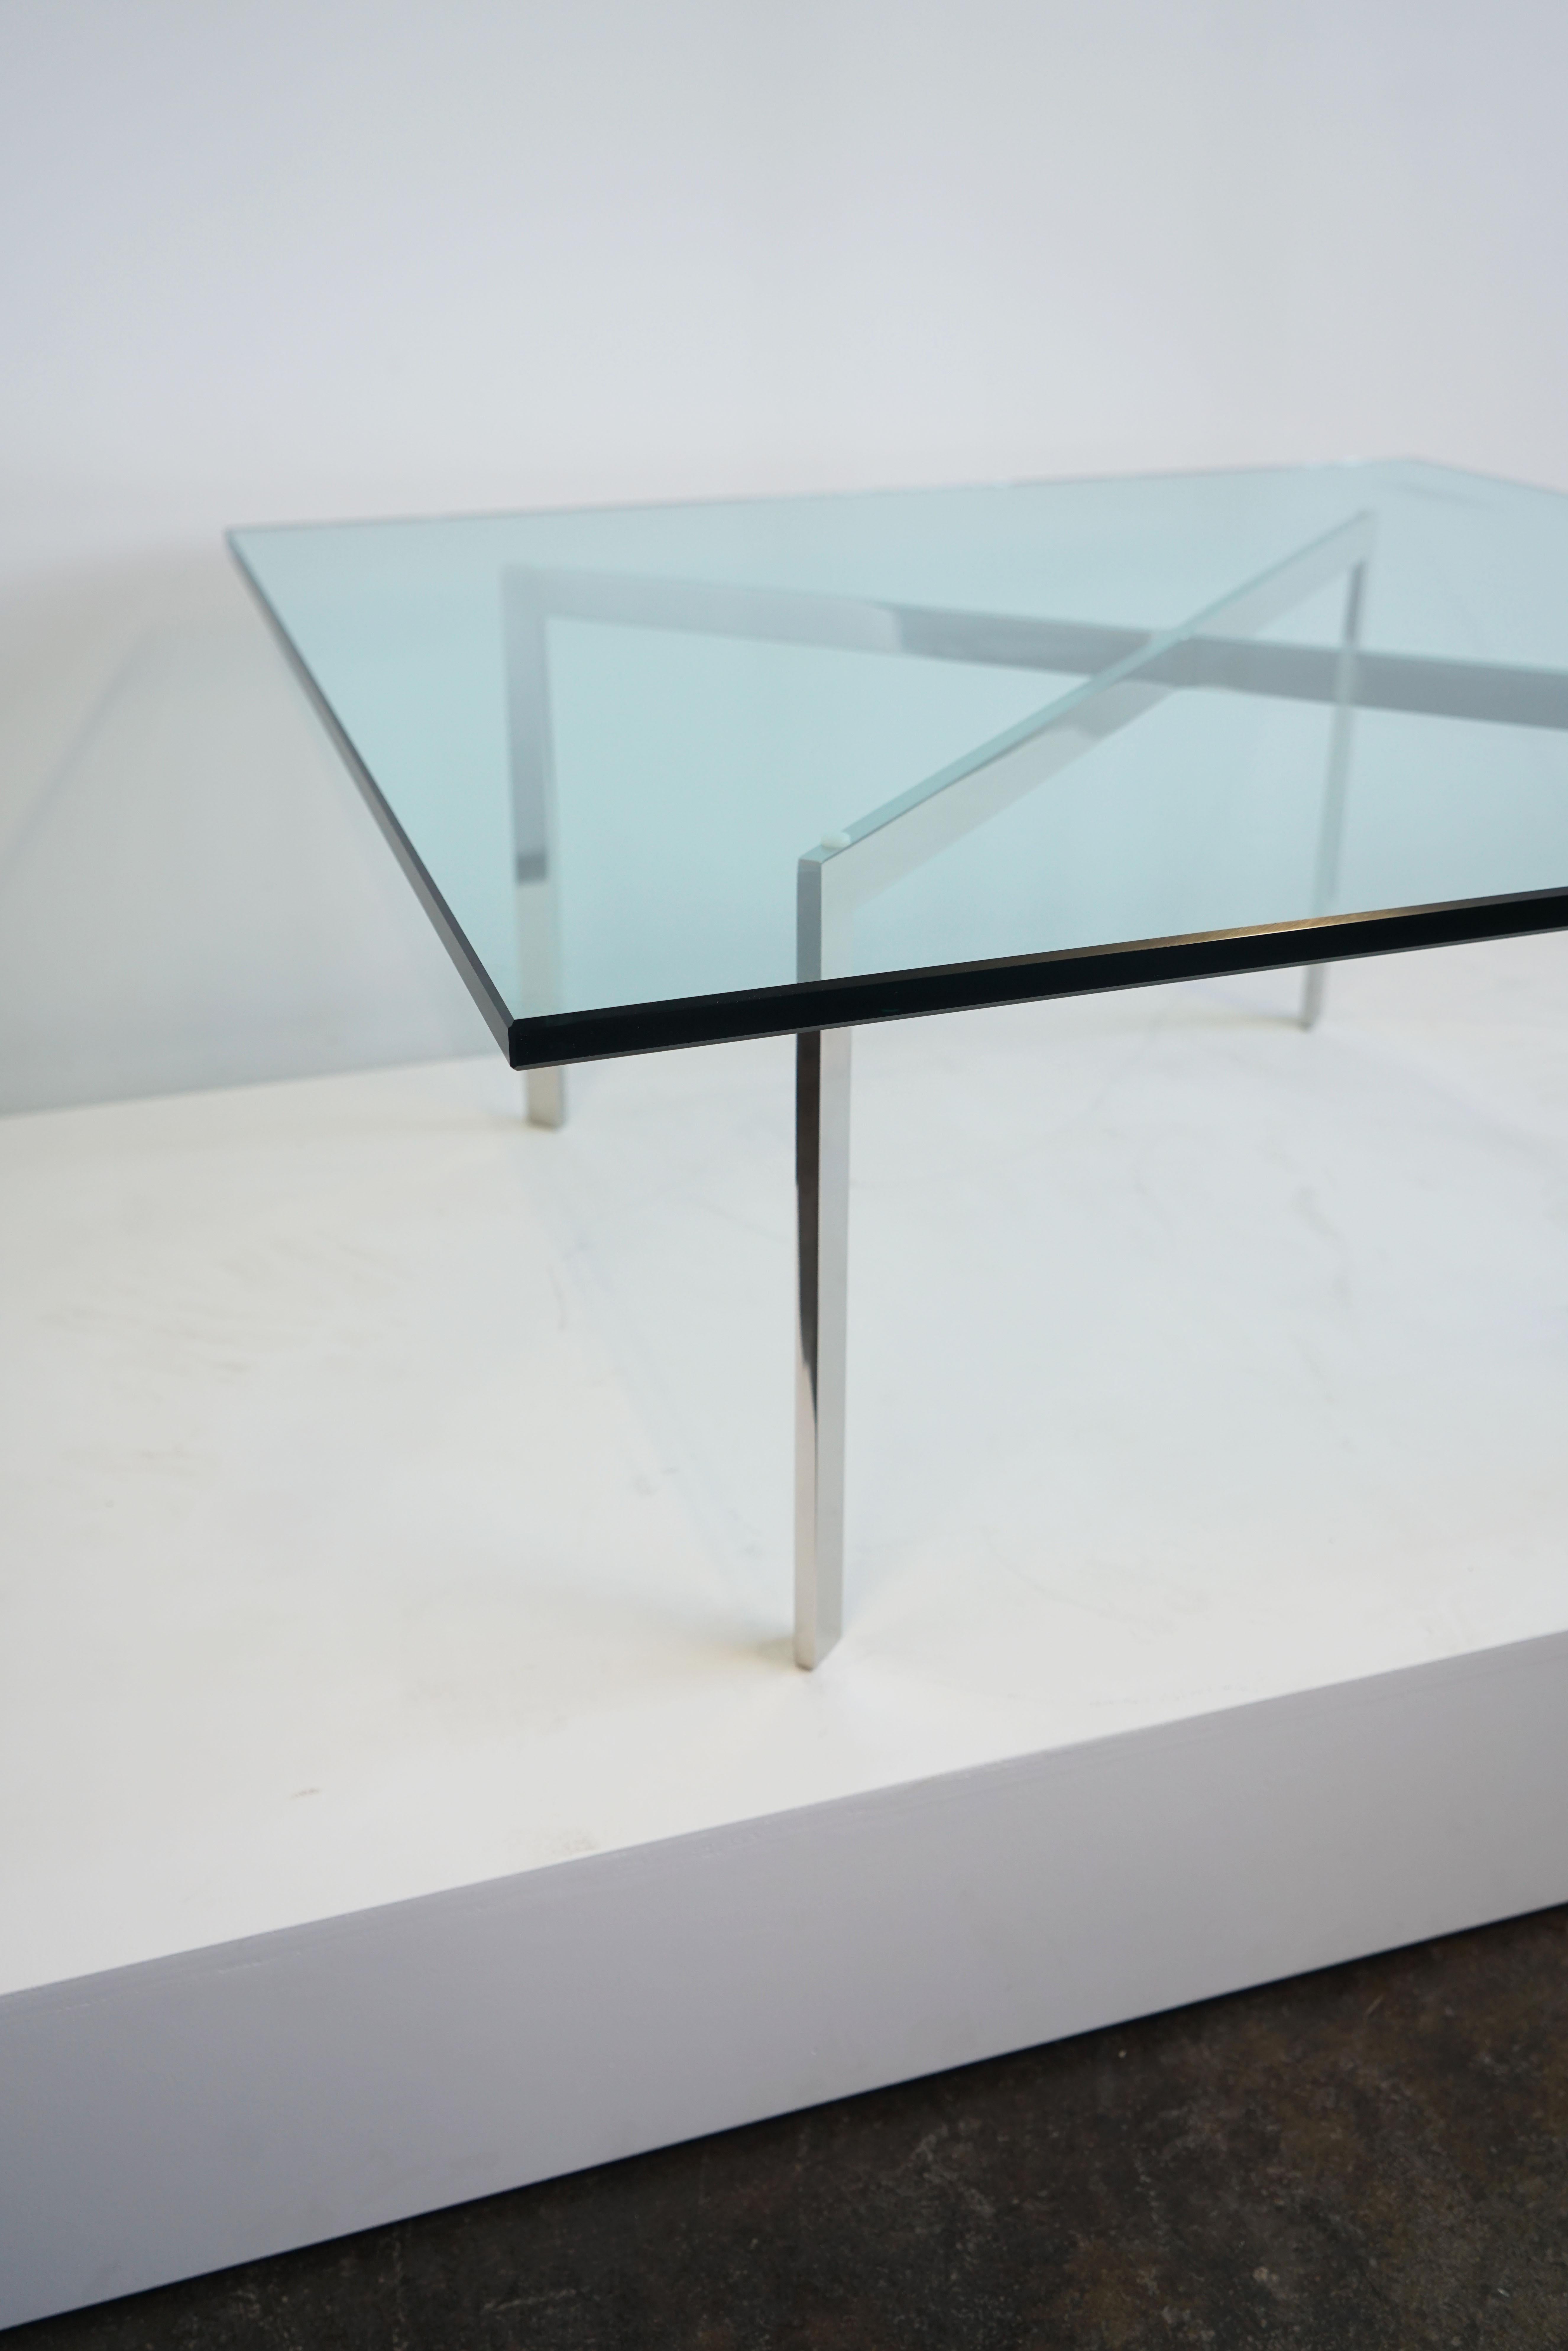 Late 20th Century Mies Van Der Rohe for Knoll Barcelona Coffee Table, near perfect